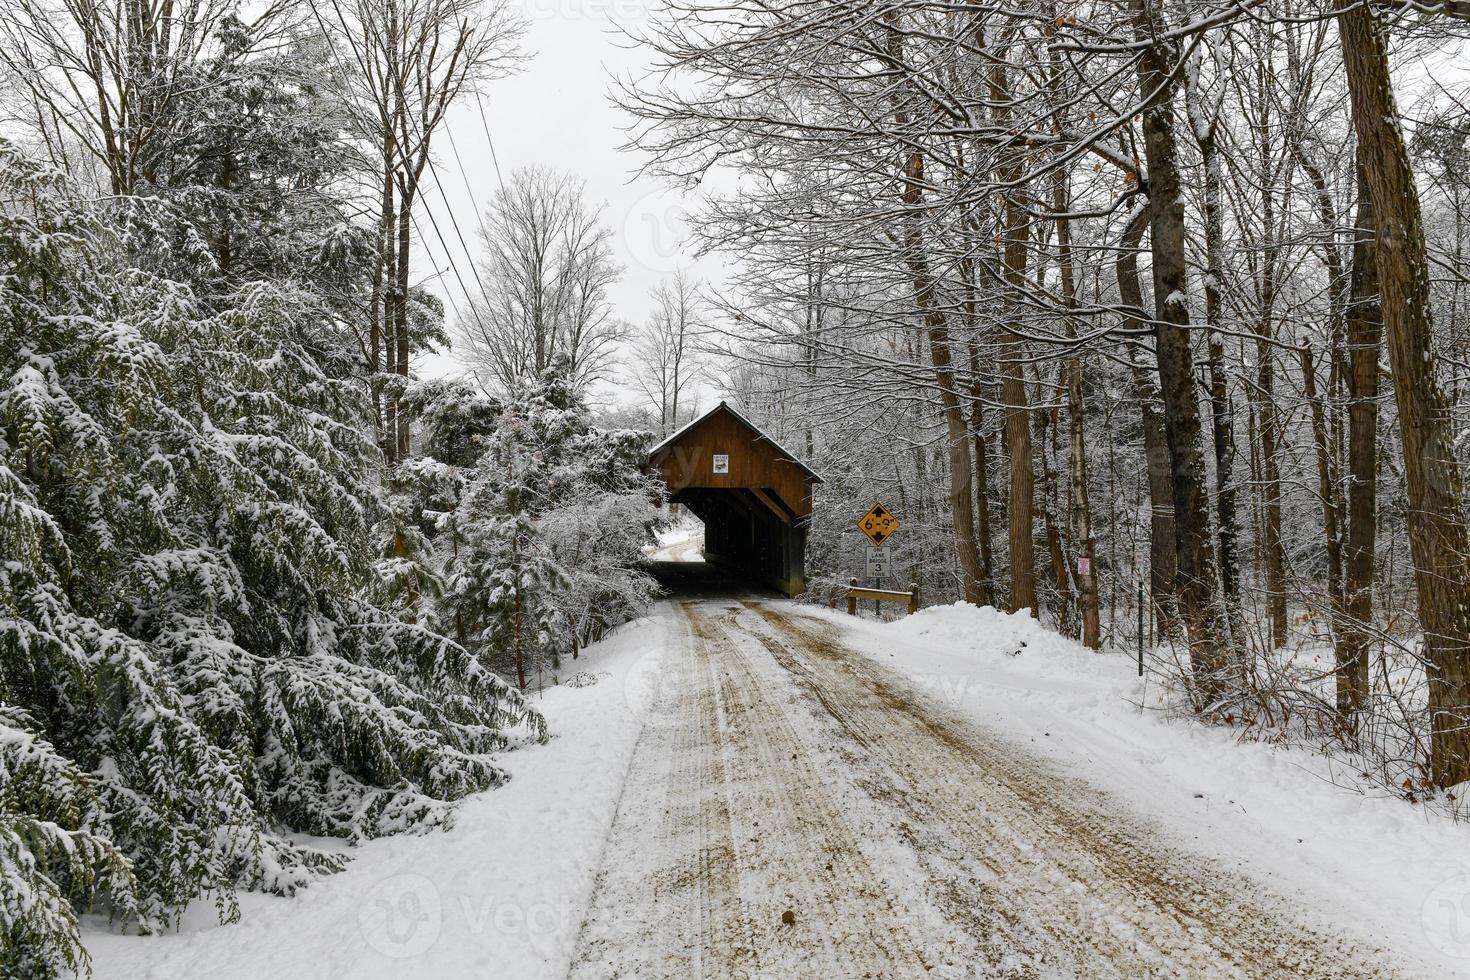 Blow-Me-Down Covered Bridge in Plainfield, New Hampshire during the winter. photo